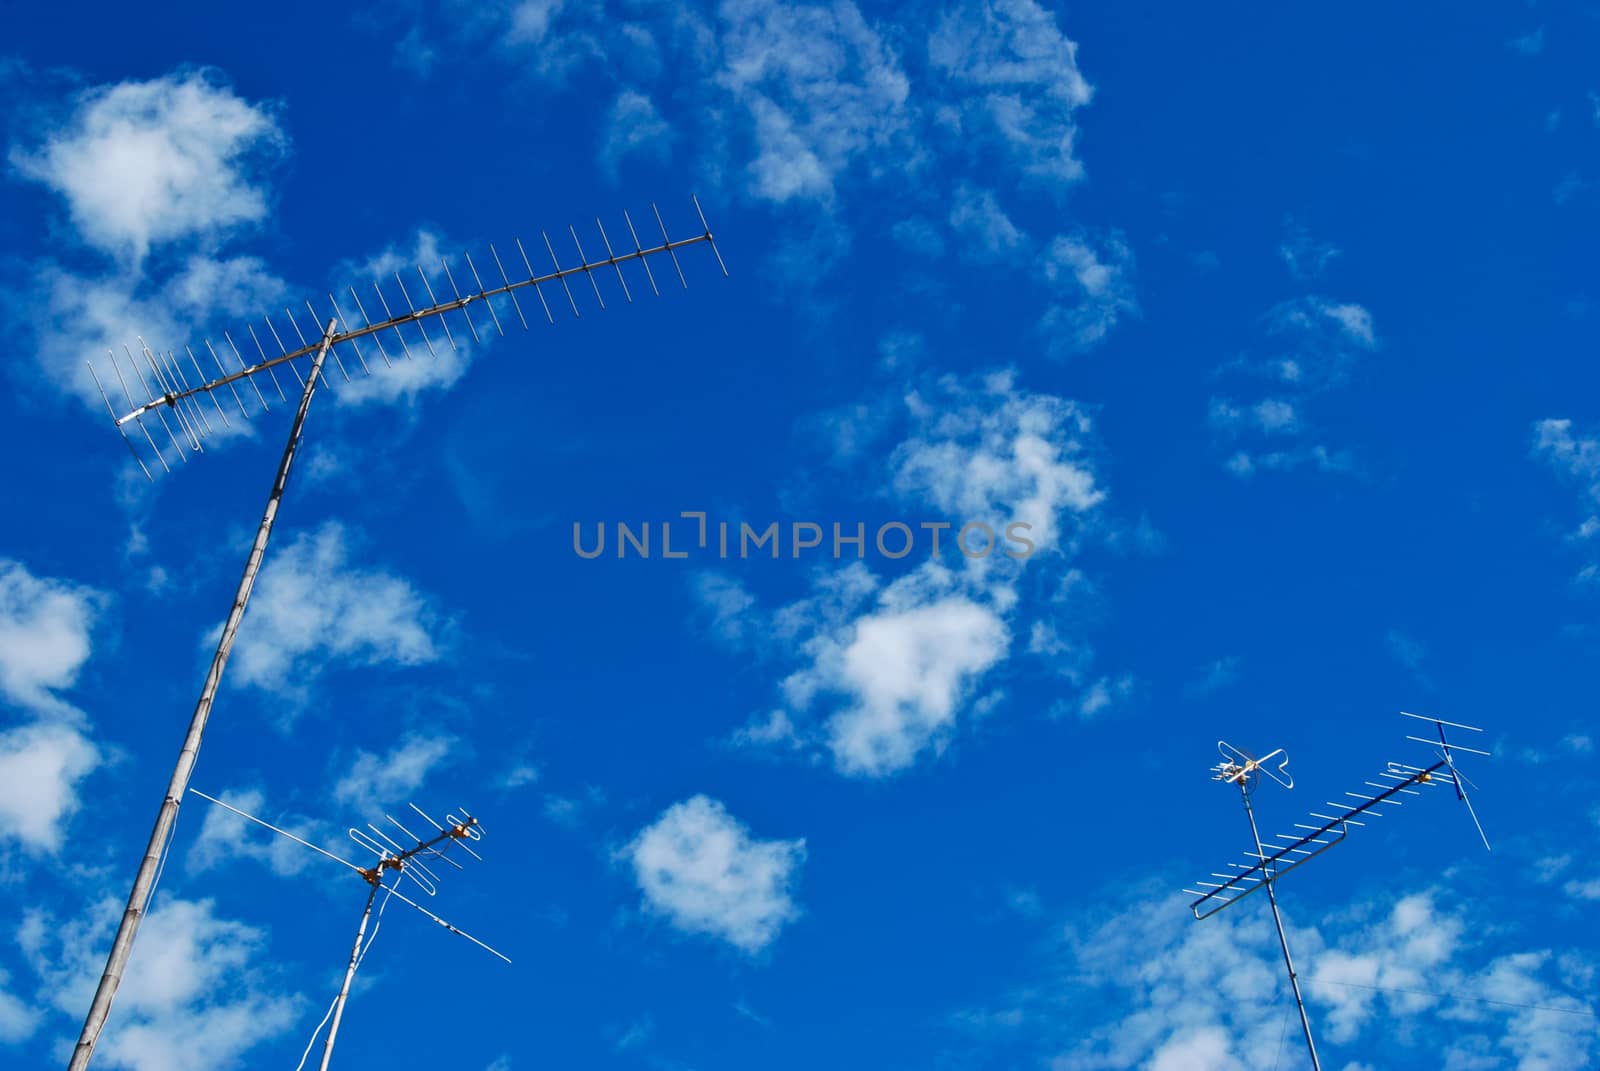 the three antenna are standing over blue sky